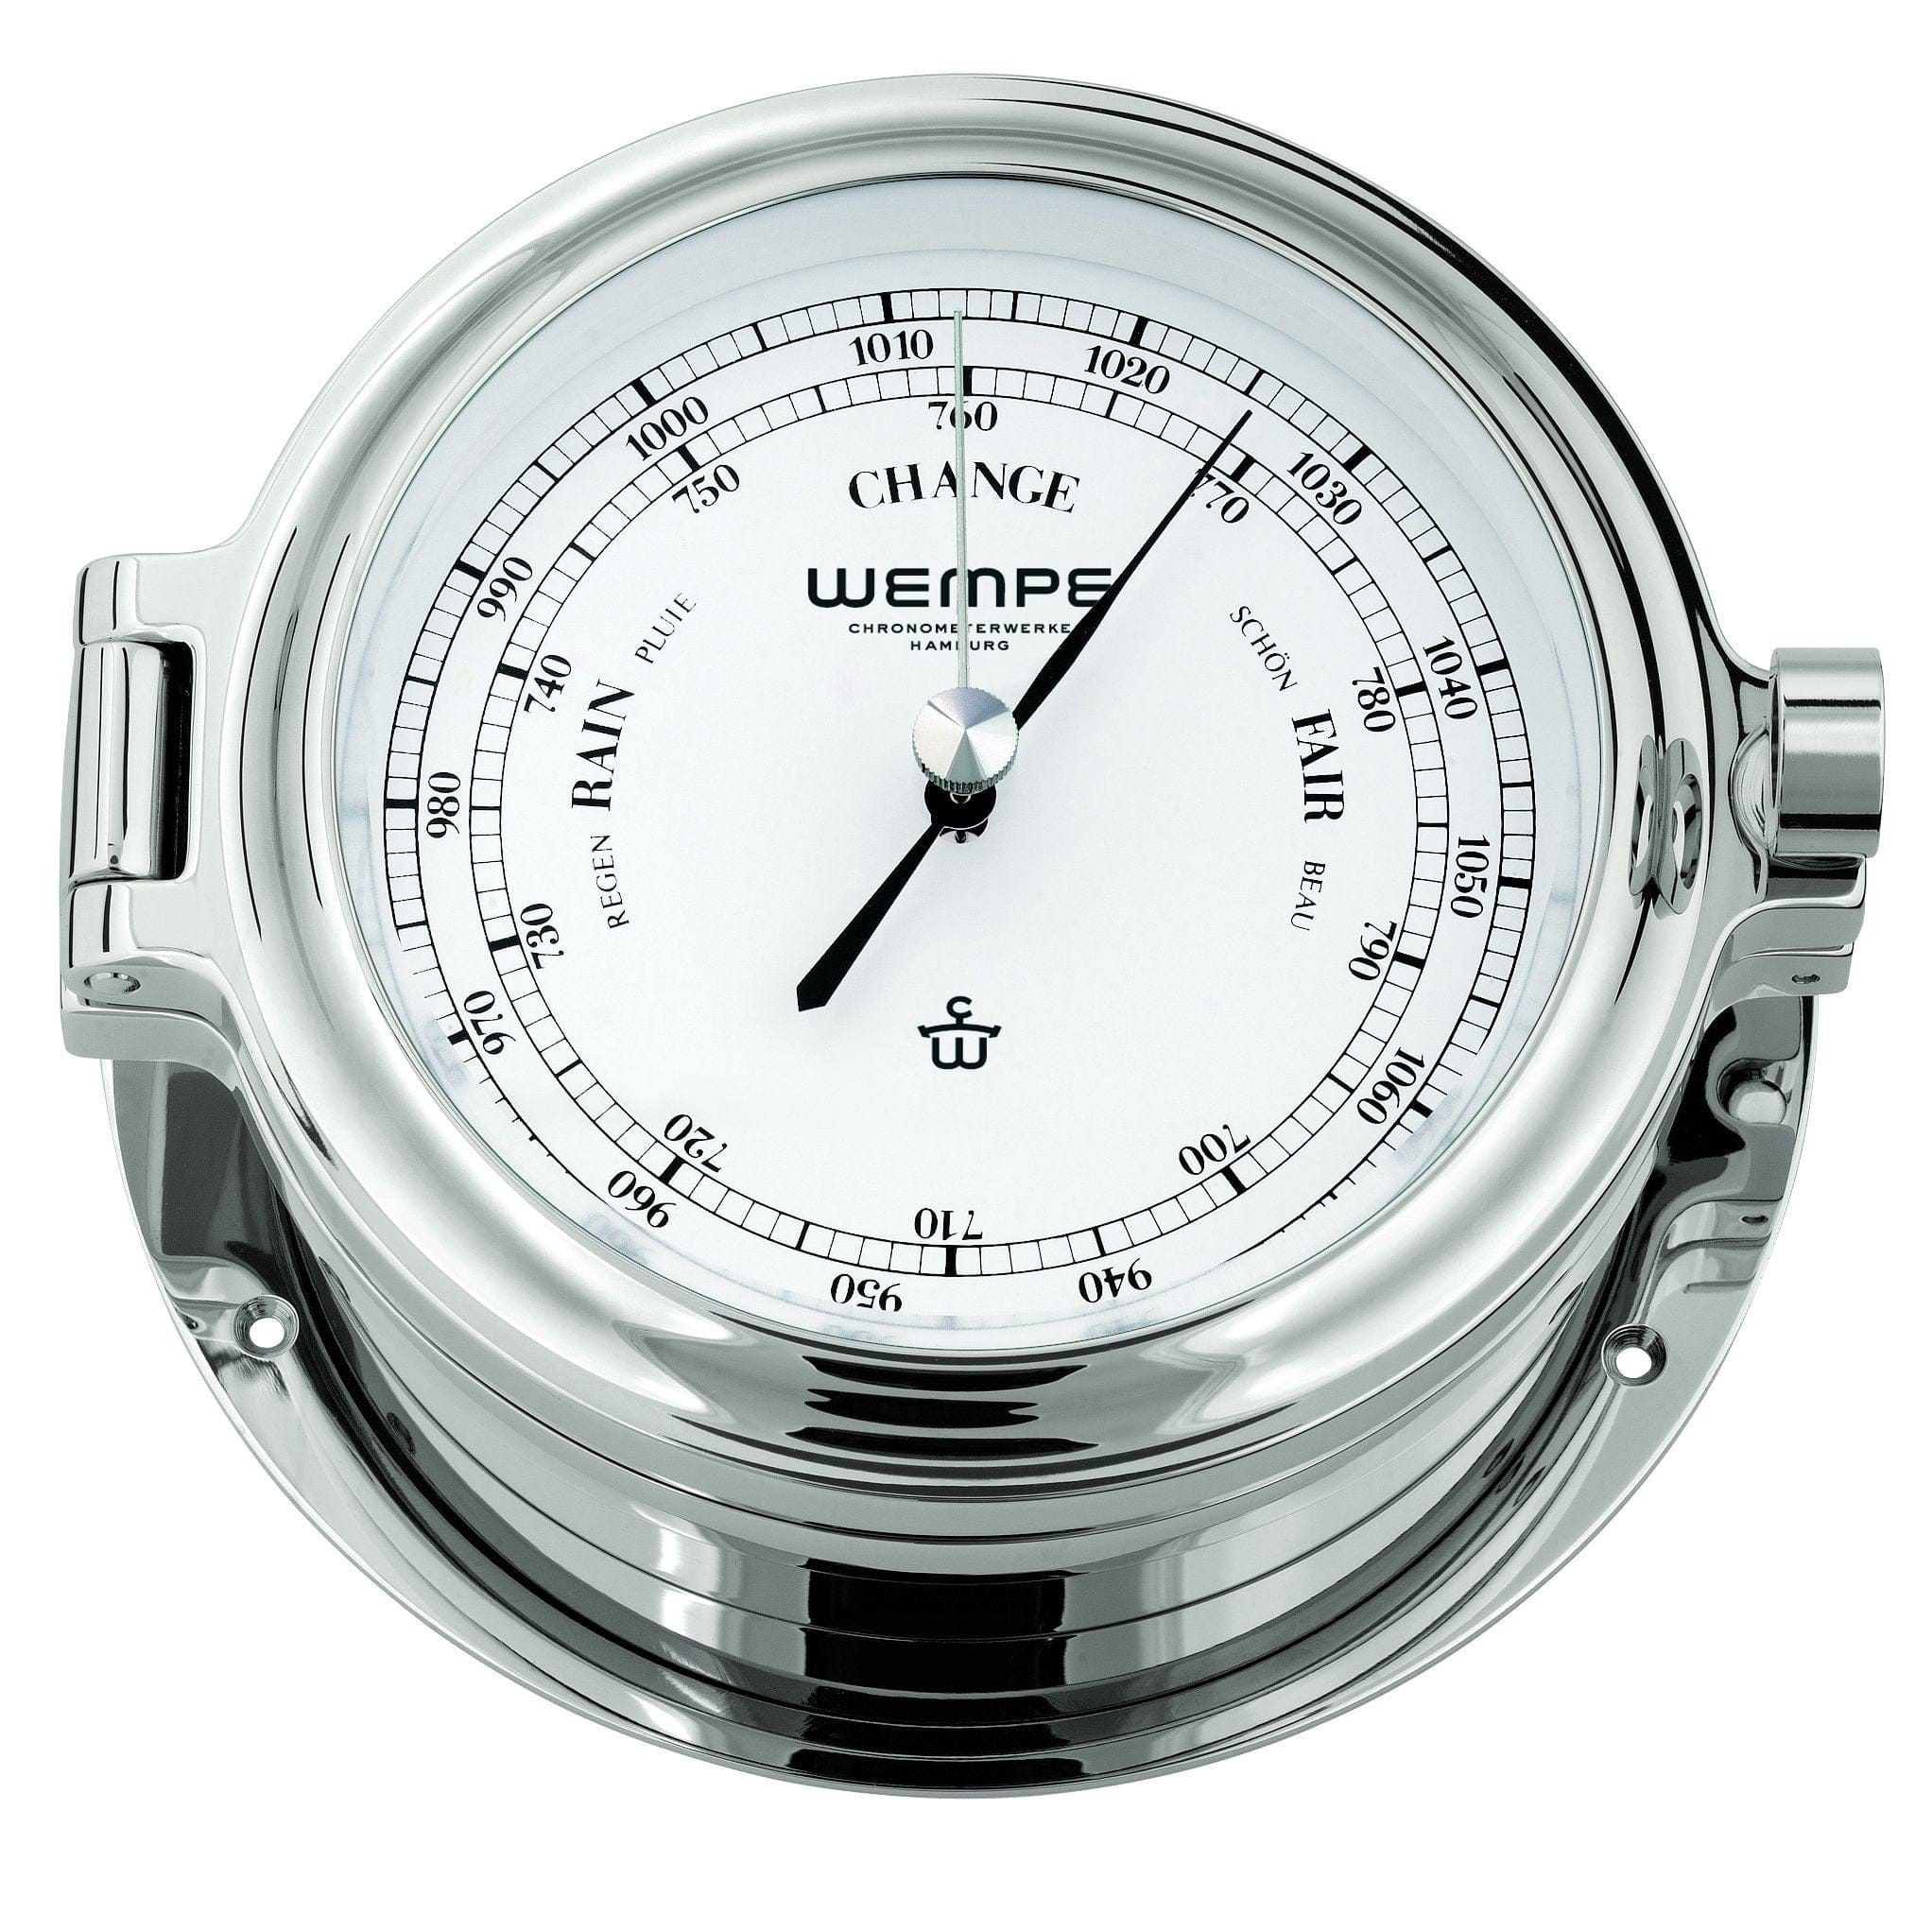 Wempe CW180002 Globaltec Cup Brass Chrome-Plated Barometer 140 x 47mm White/Black